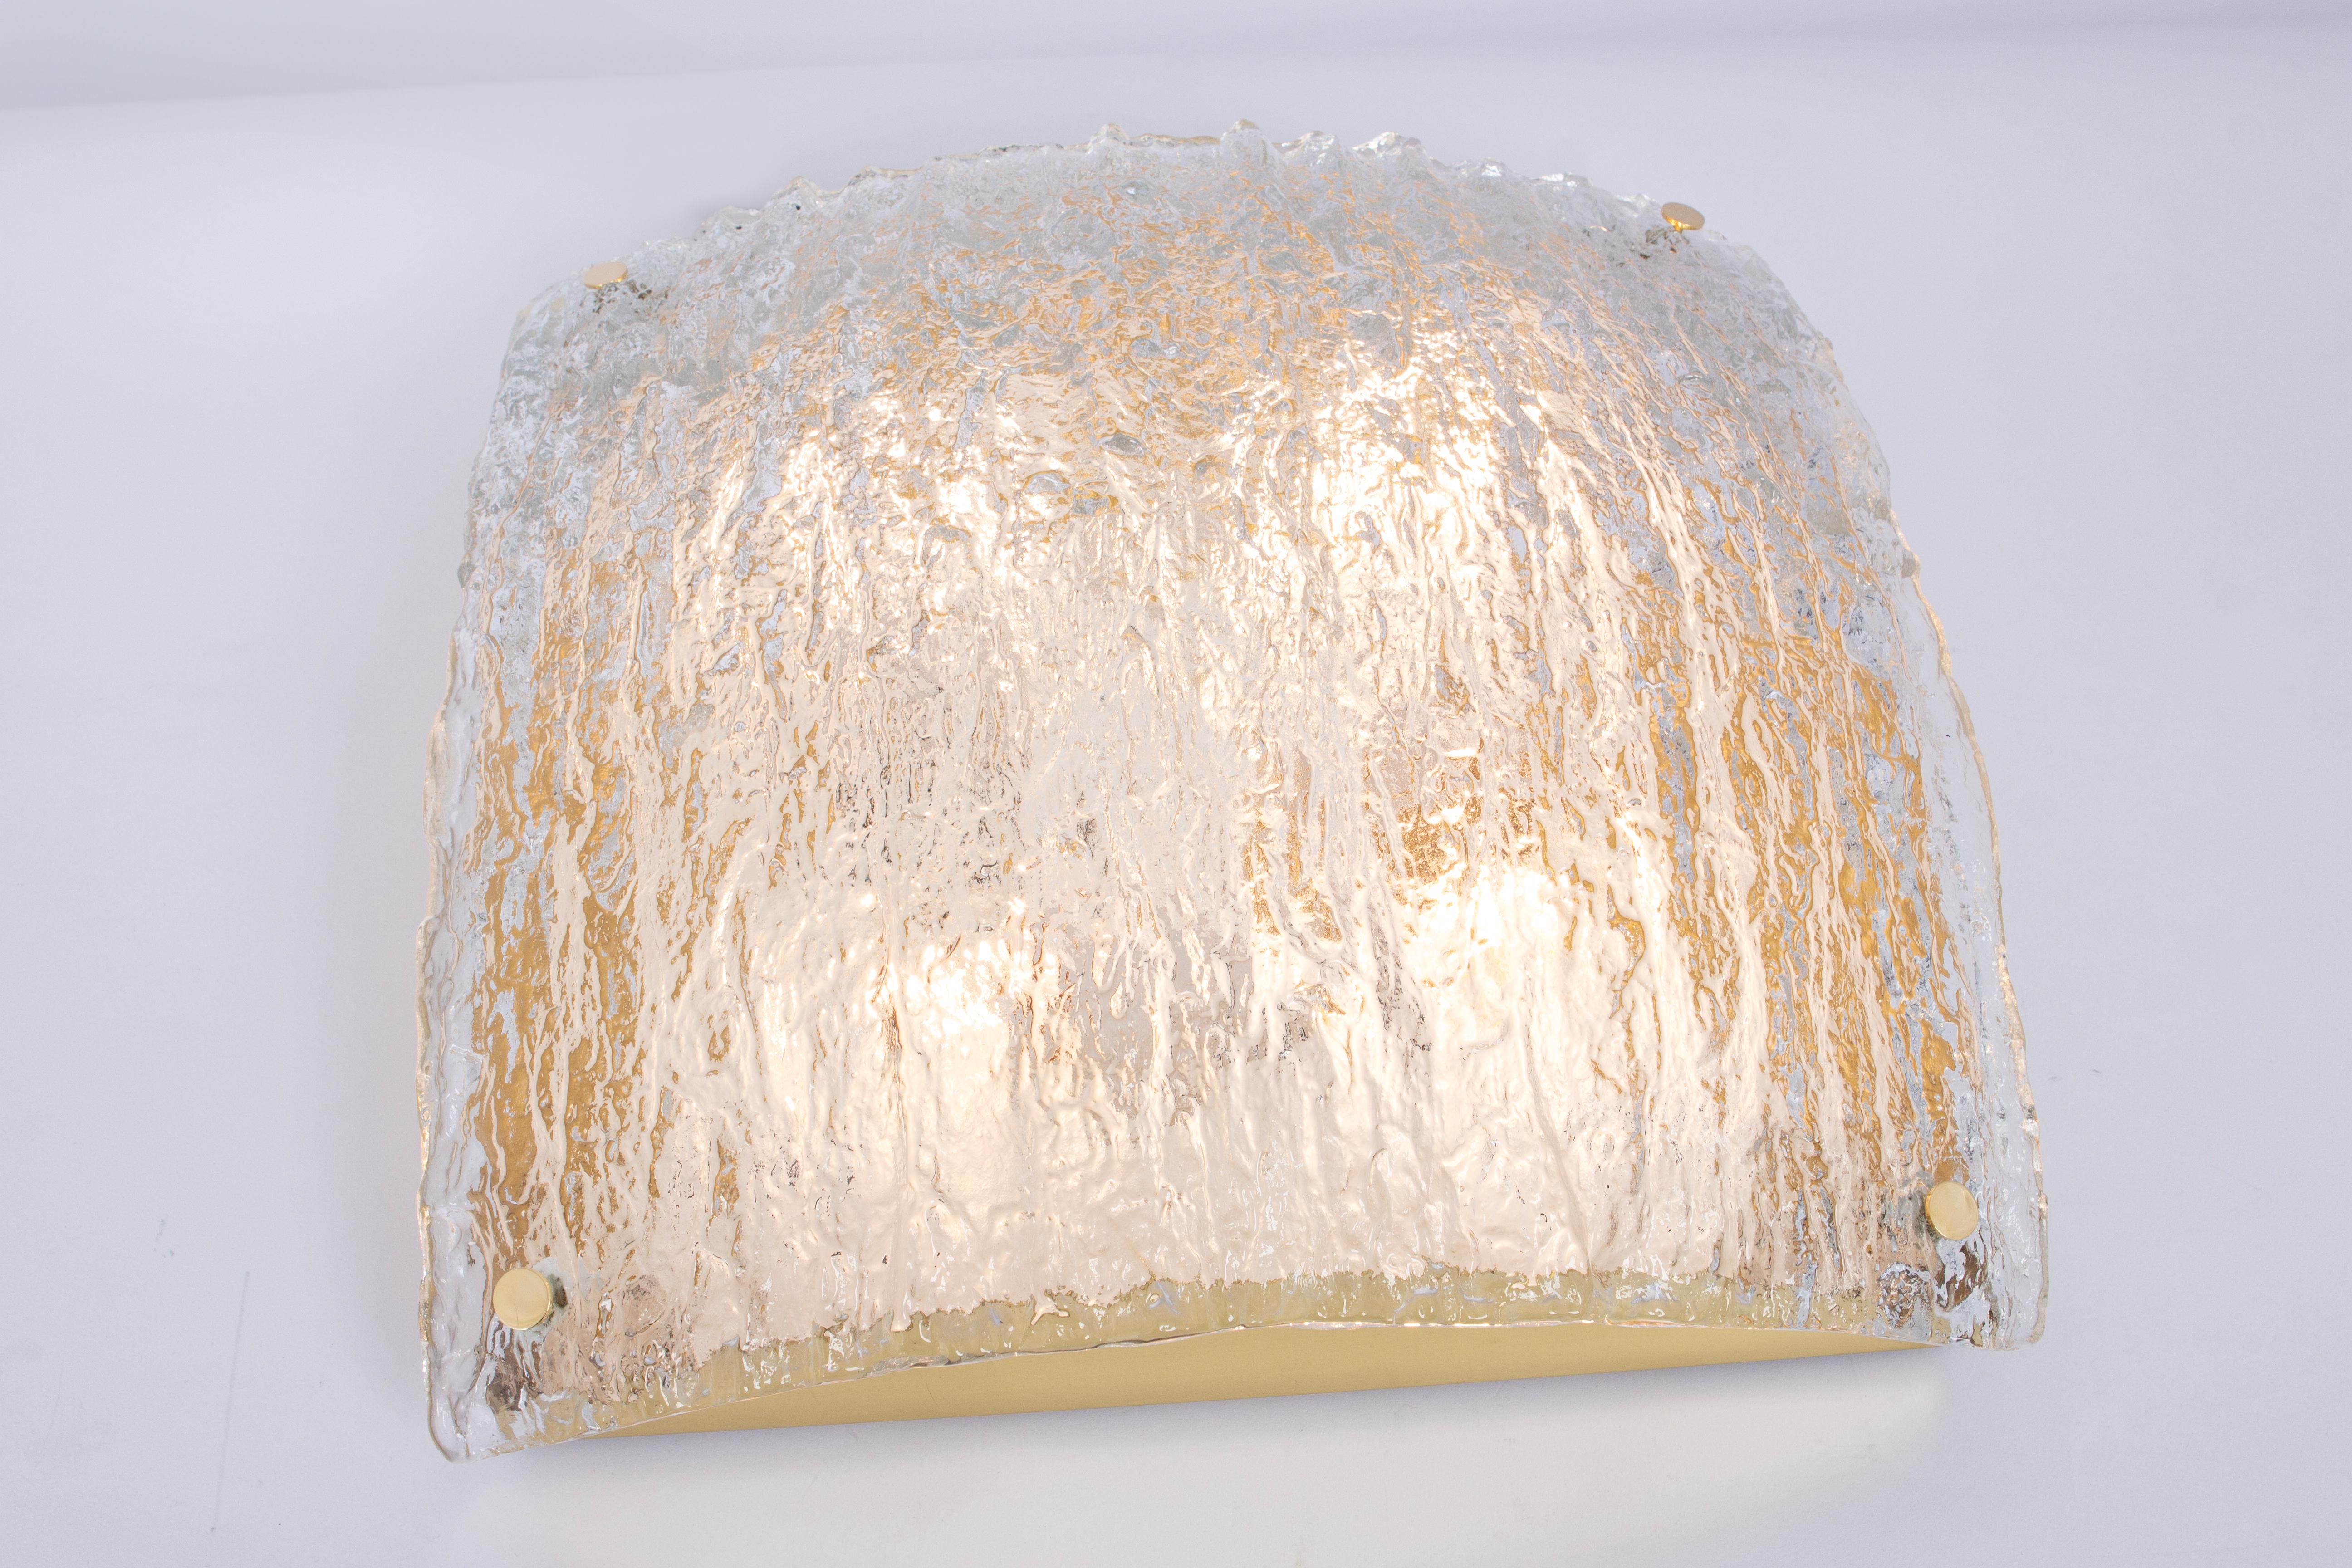 A wonderful Murano glass flush mount by kaiser, Germany, 1970s.
Thick textured Glass fixtured on a metal and brass base.

High quality and in very good condition. Cleaned, well-wired, and ready to use. 

The fixture requires 4 x E27 standard bulbs